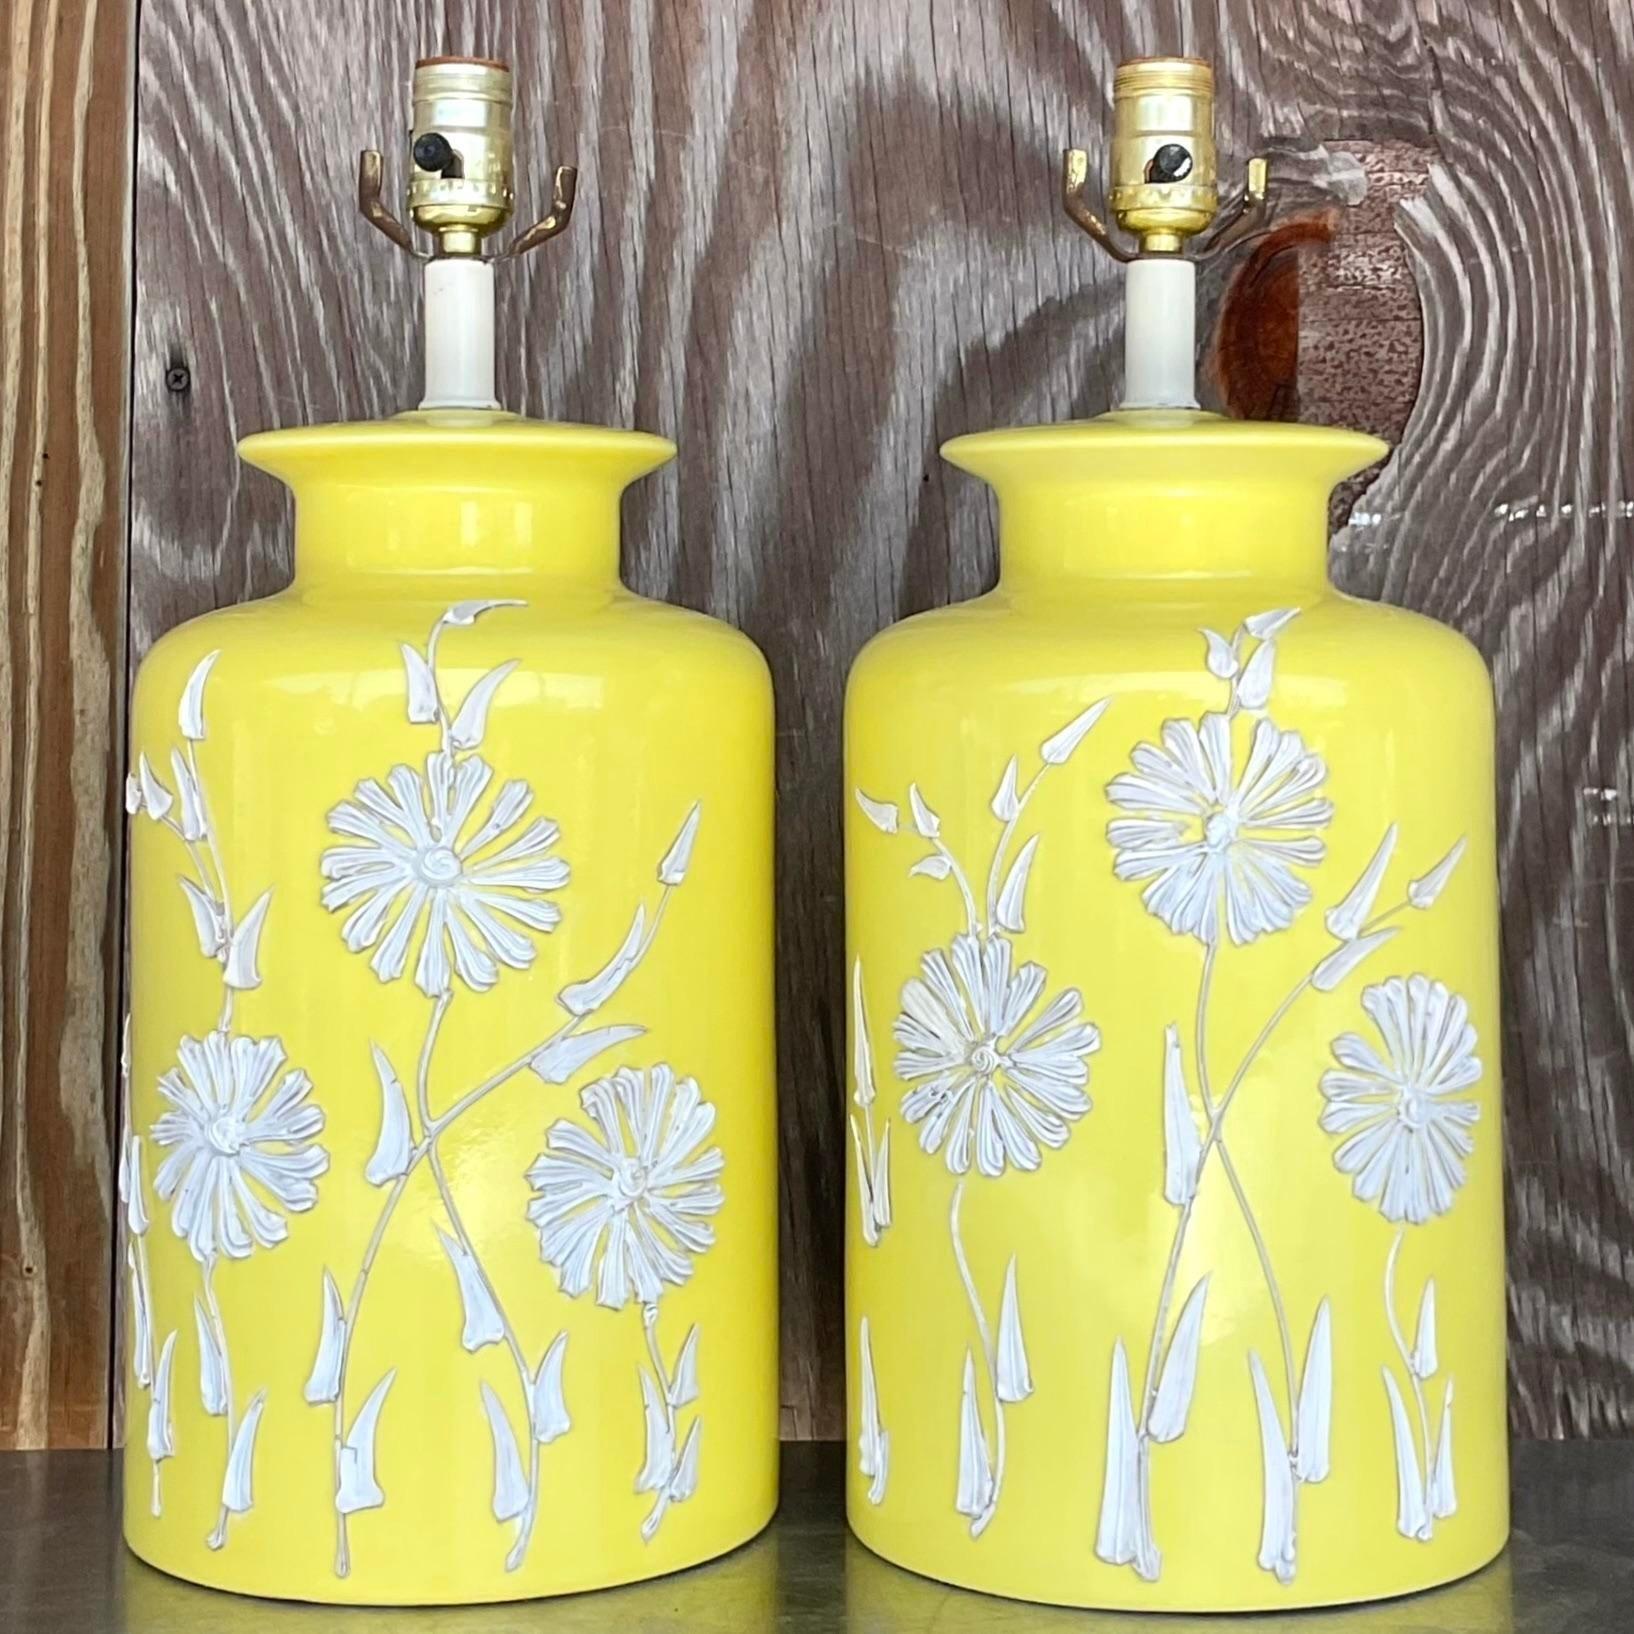 American Vintage Boho Glazed Ceramic Icing Flower Lamps - a Pair